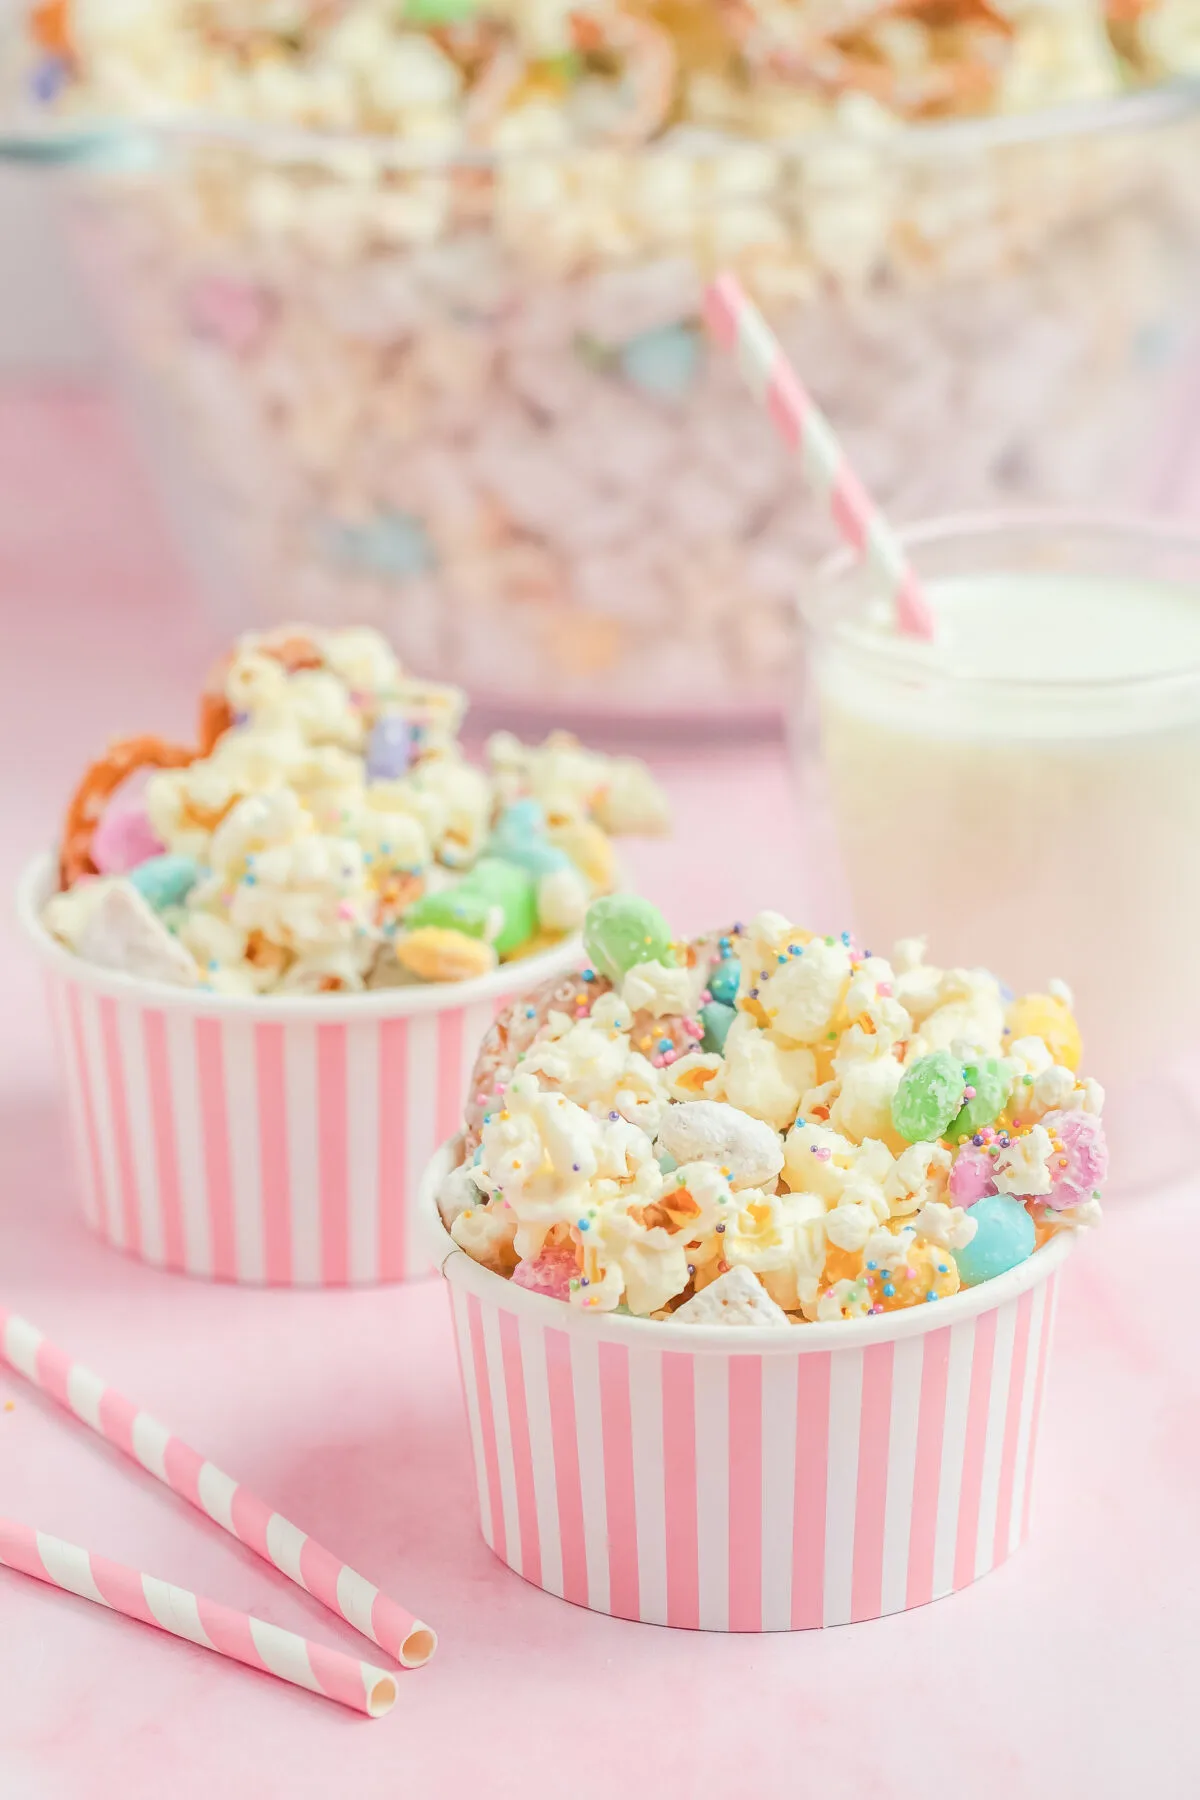 This bunny bait recipe is a tasty Easter snack mix made with popcorn, pastel M&M's, pretzels, white chocolate, sprinkles, and muddy buddies.